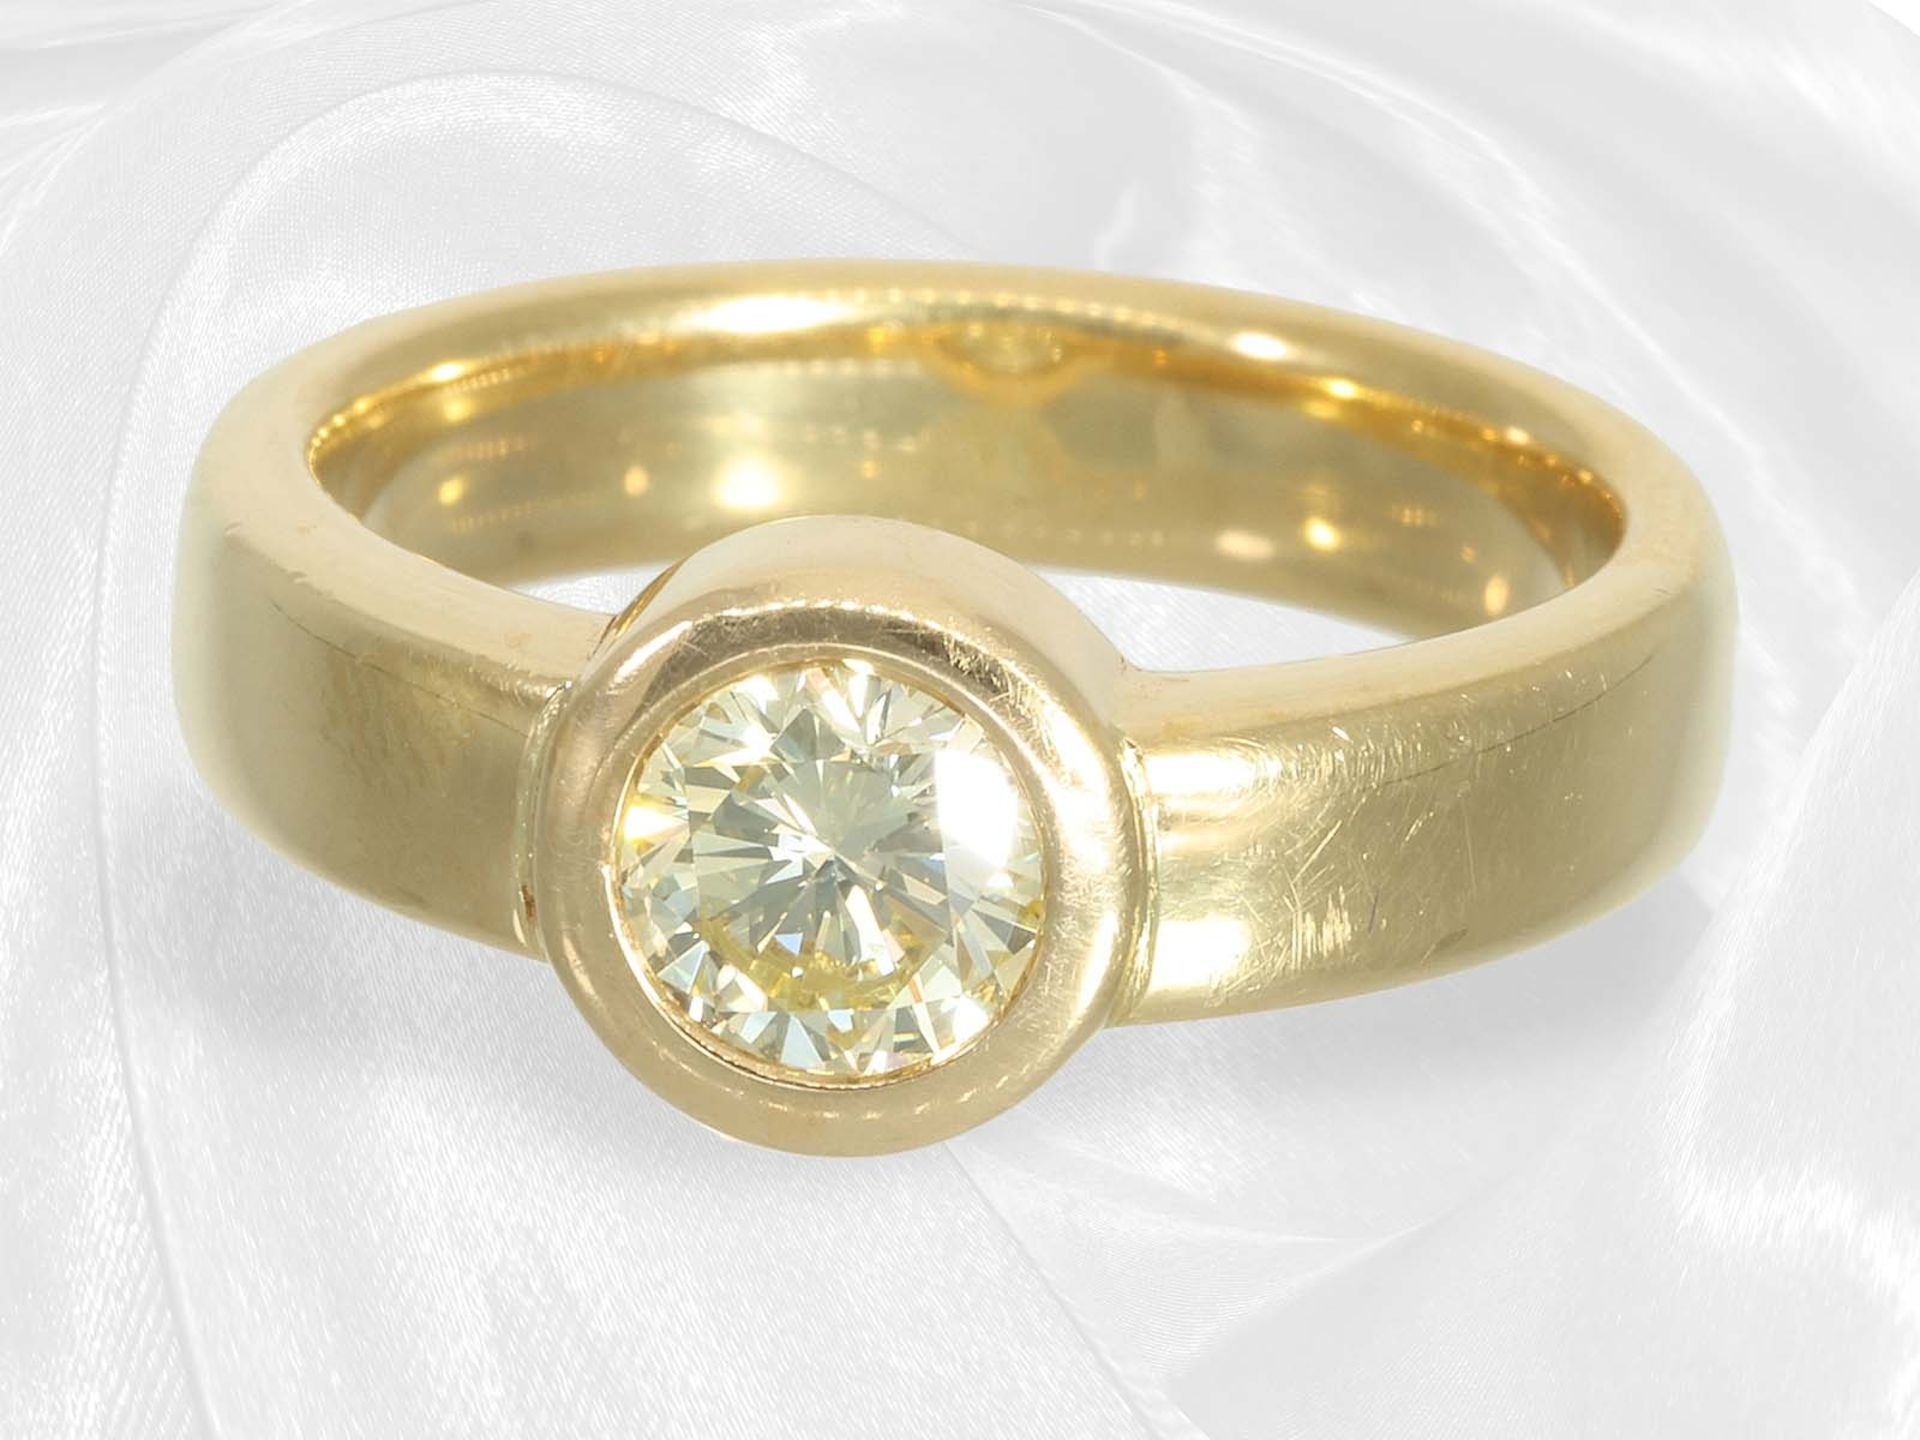 Solid solitaire goldsmith ring with a brilliant-cut diamond of approx. 0.65ct - Image 2 of 4